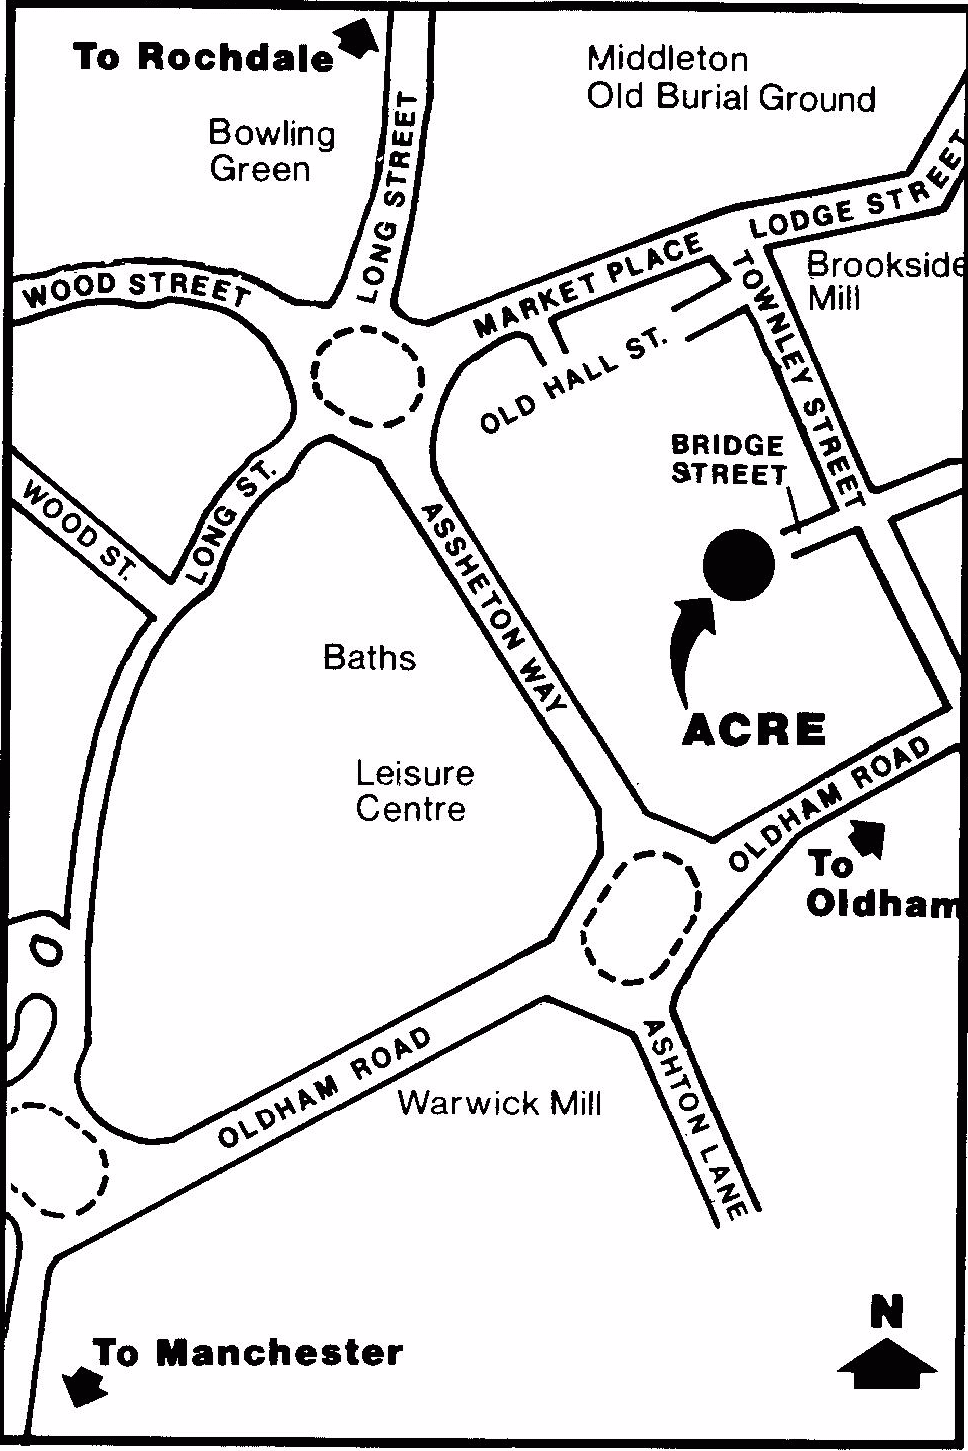 Map - may take a moment to download, sorry. Otherwise, ring for directions